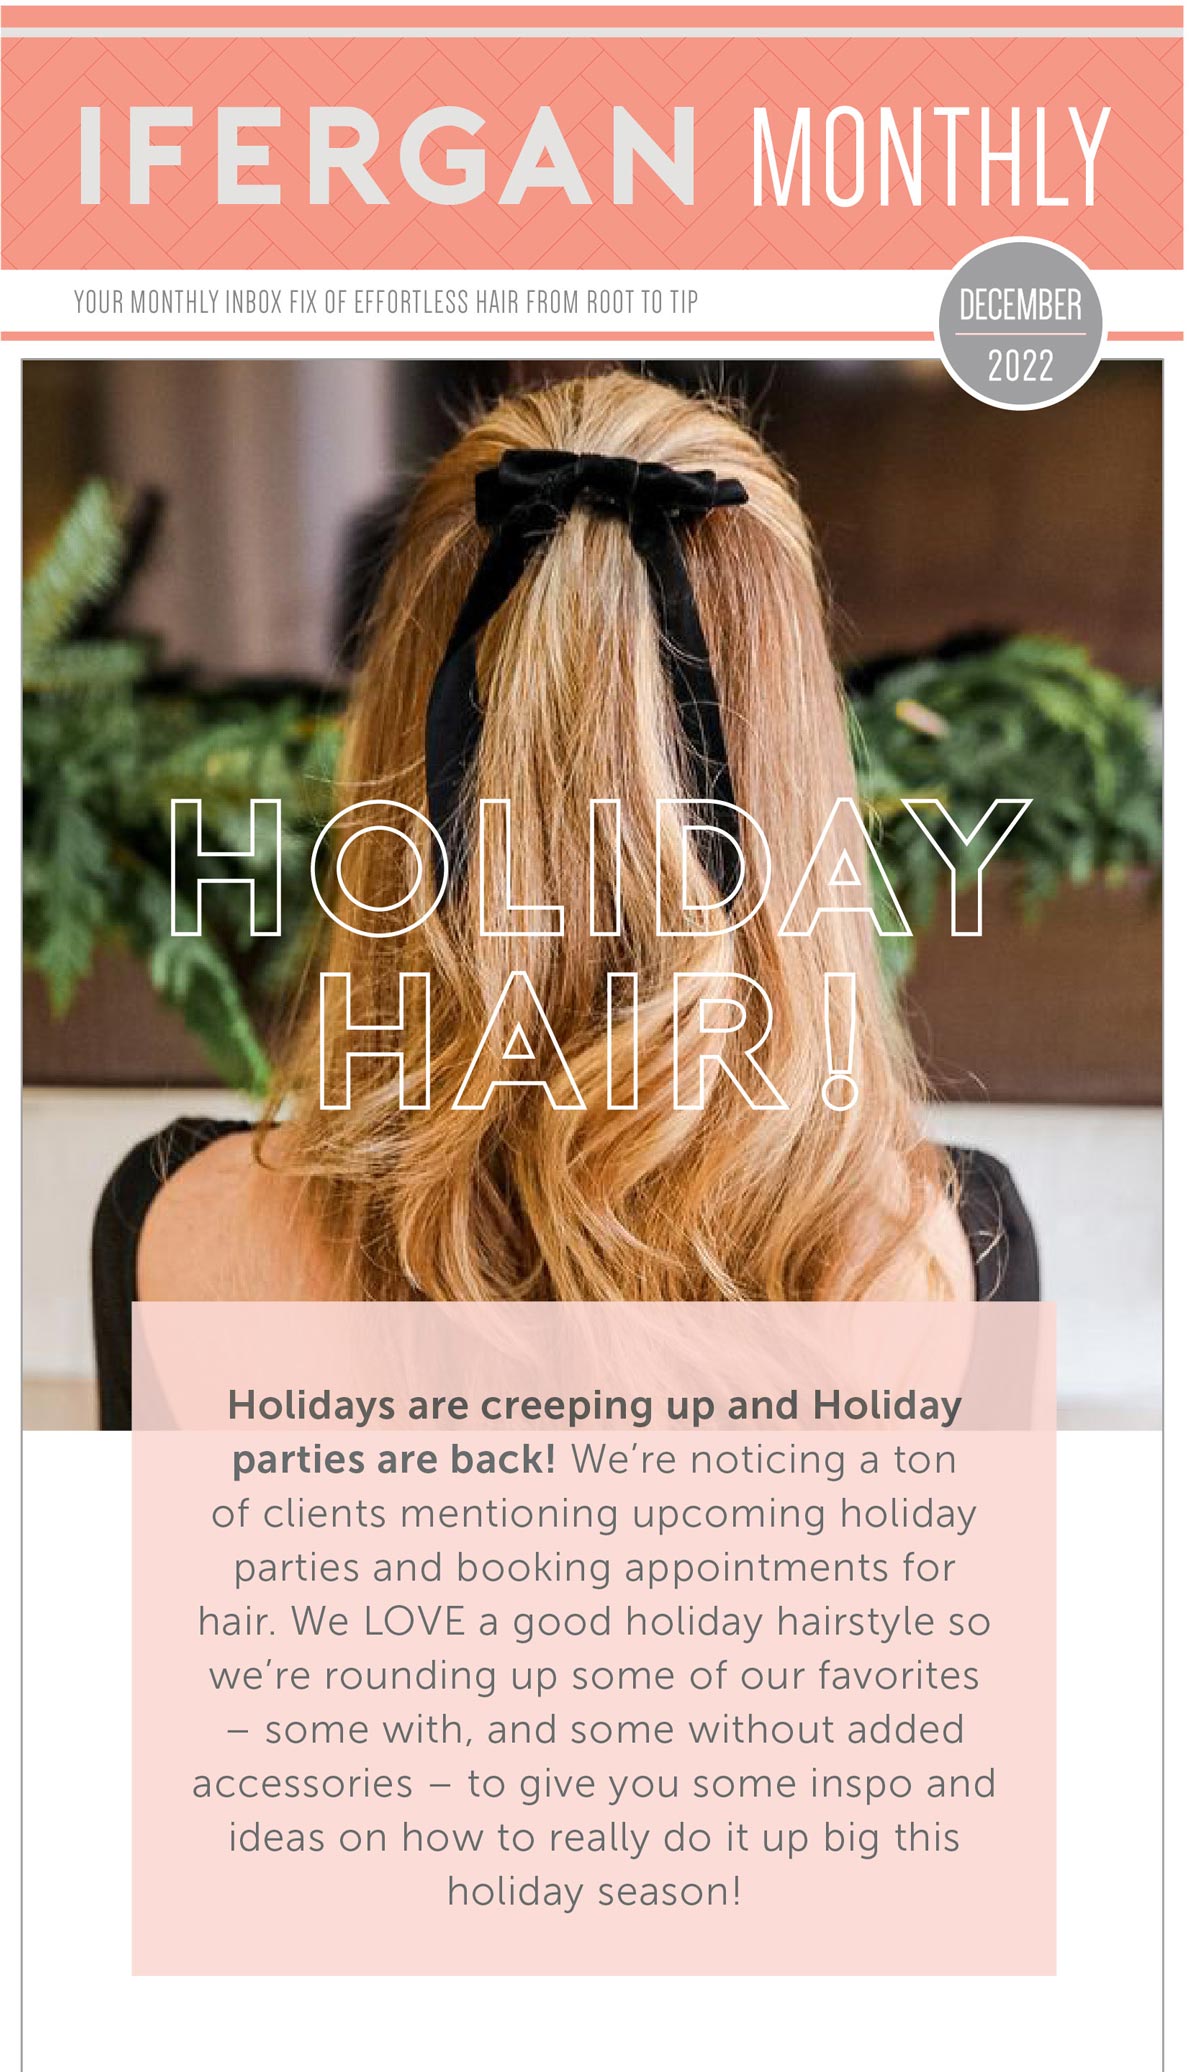 December Newsletter Holiday Hair! Holidays are creeping up and Holiday parties are back! We’re noticing a ton of clients mentioning upcoming holiday parties and booking appointments for hair. We LOVE a good holiday hairstyle so we’re rounding up some of our favorites- some with, and some without added accessories- to give you some inspo and ideas on how to really do it up big this holiday season!